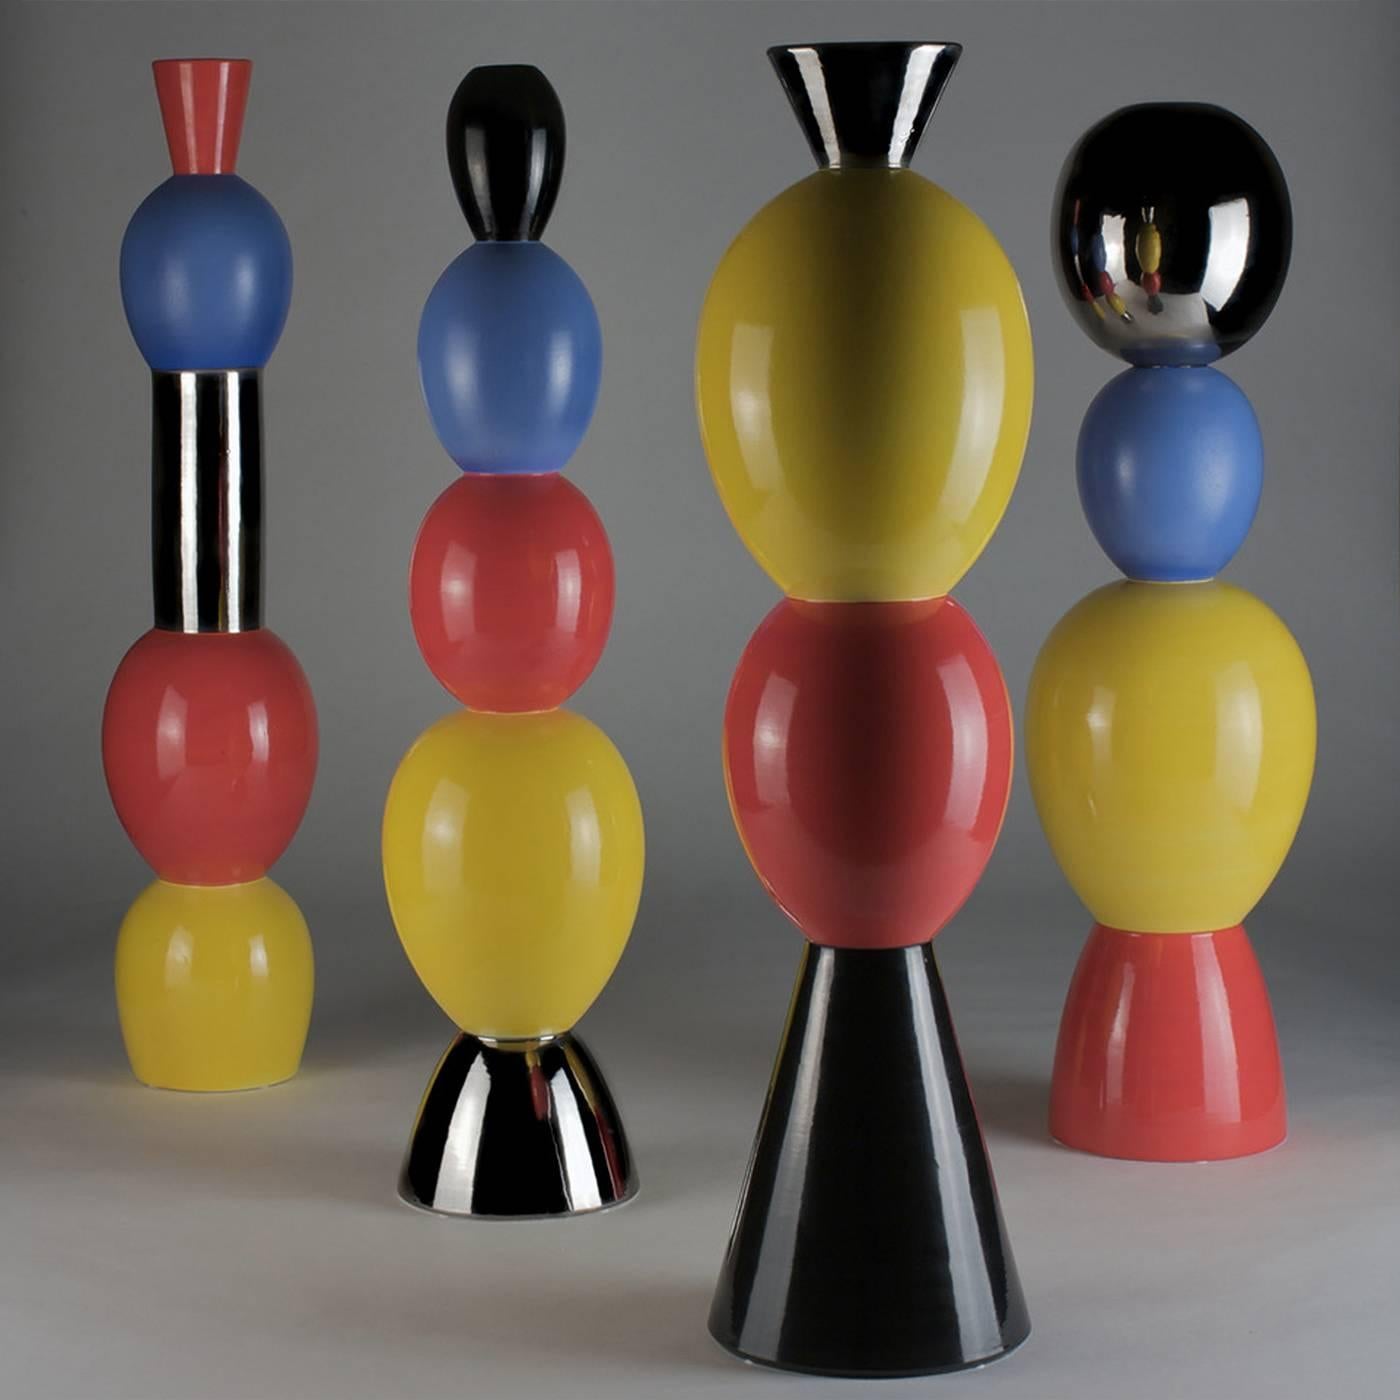 This colorful TOTEM like decorative sculpture was designed by Alessandro Mendini for Superego and made entirely in ceramic. Part of a limited series of 50 pieces, all numbered and signed, this sculpture features a series of sinuous elements, all